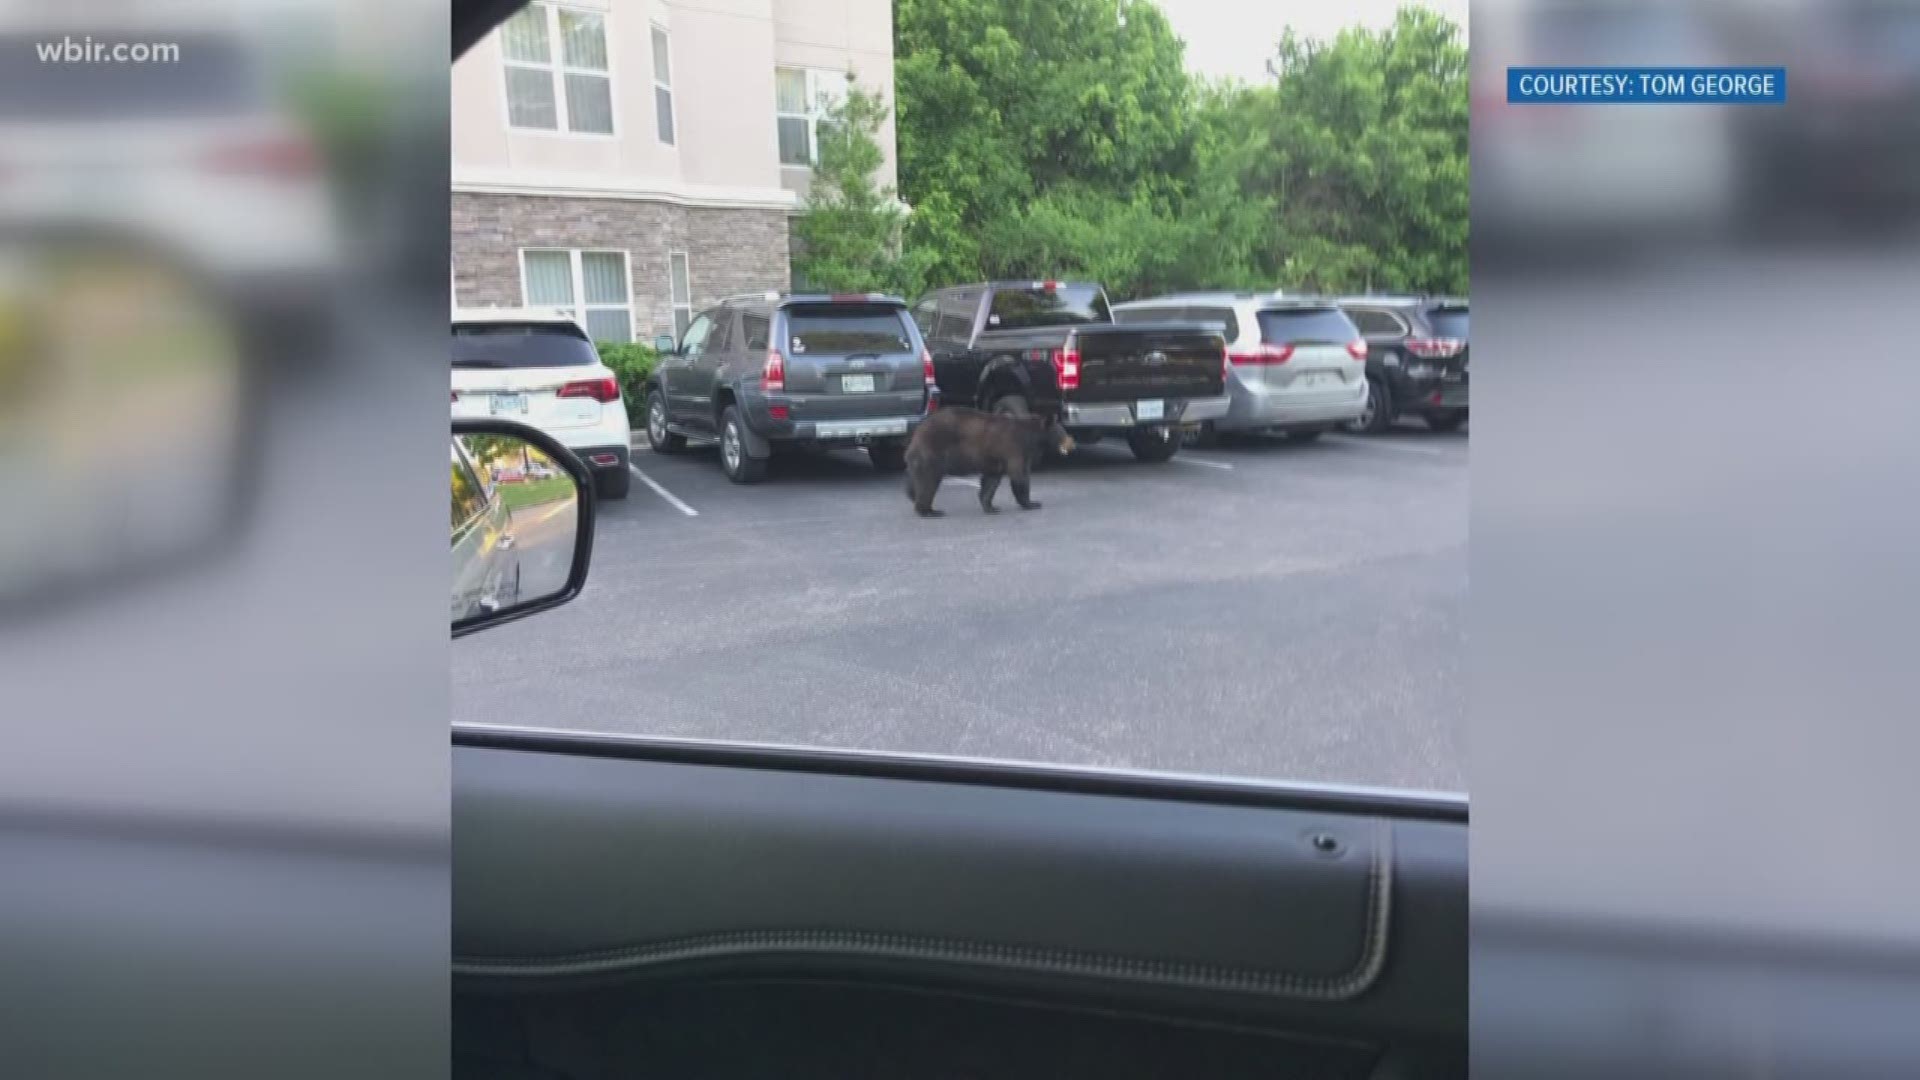 Tom George took this picture at the Homewood Suites on Turkey Drive. He says it freaked him out since there aren't bears where he lives in Florida.